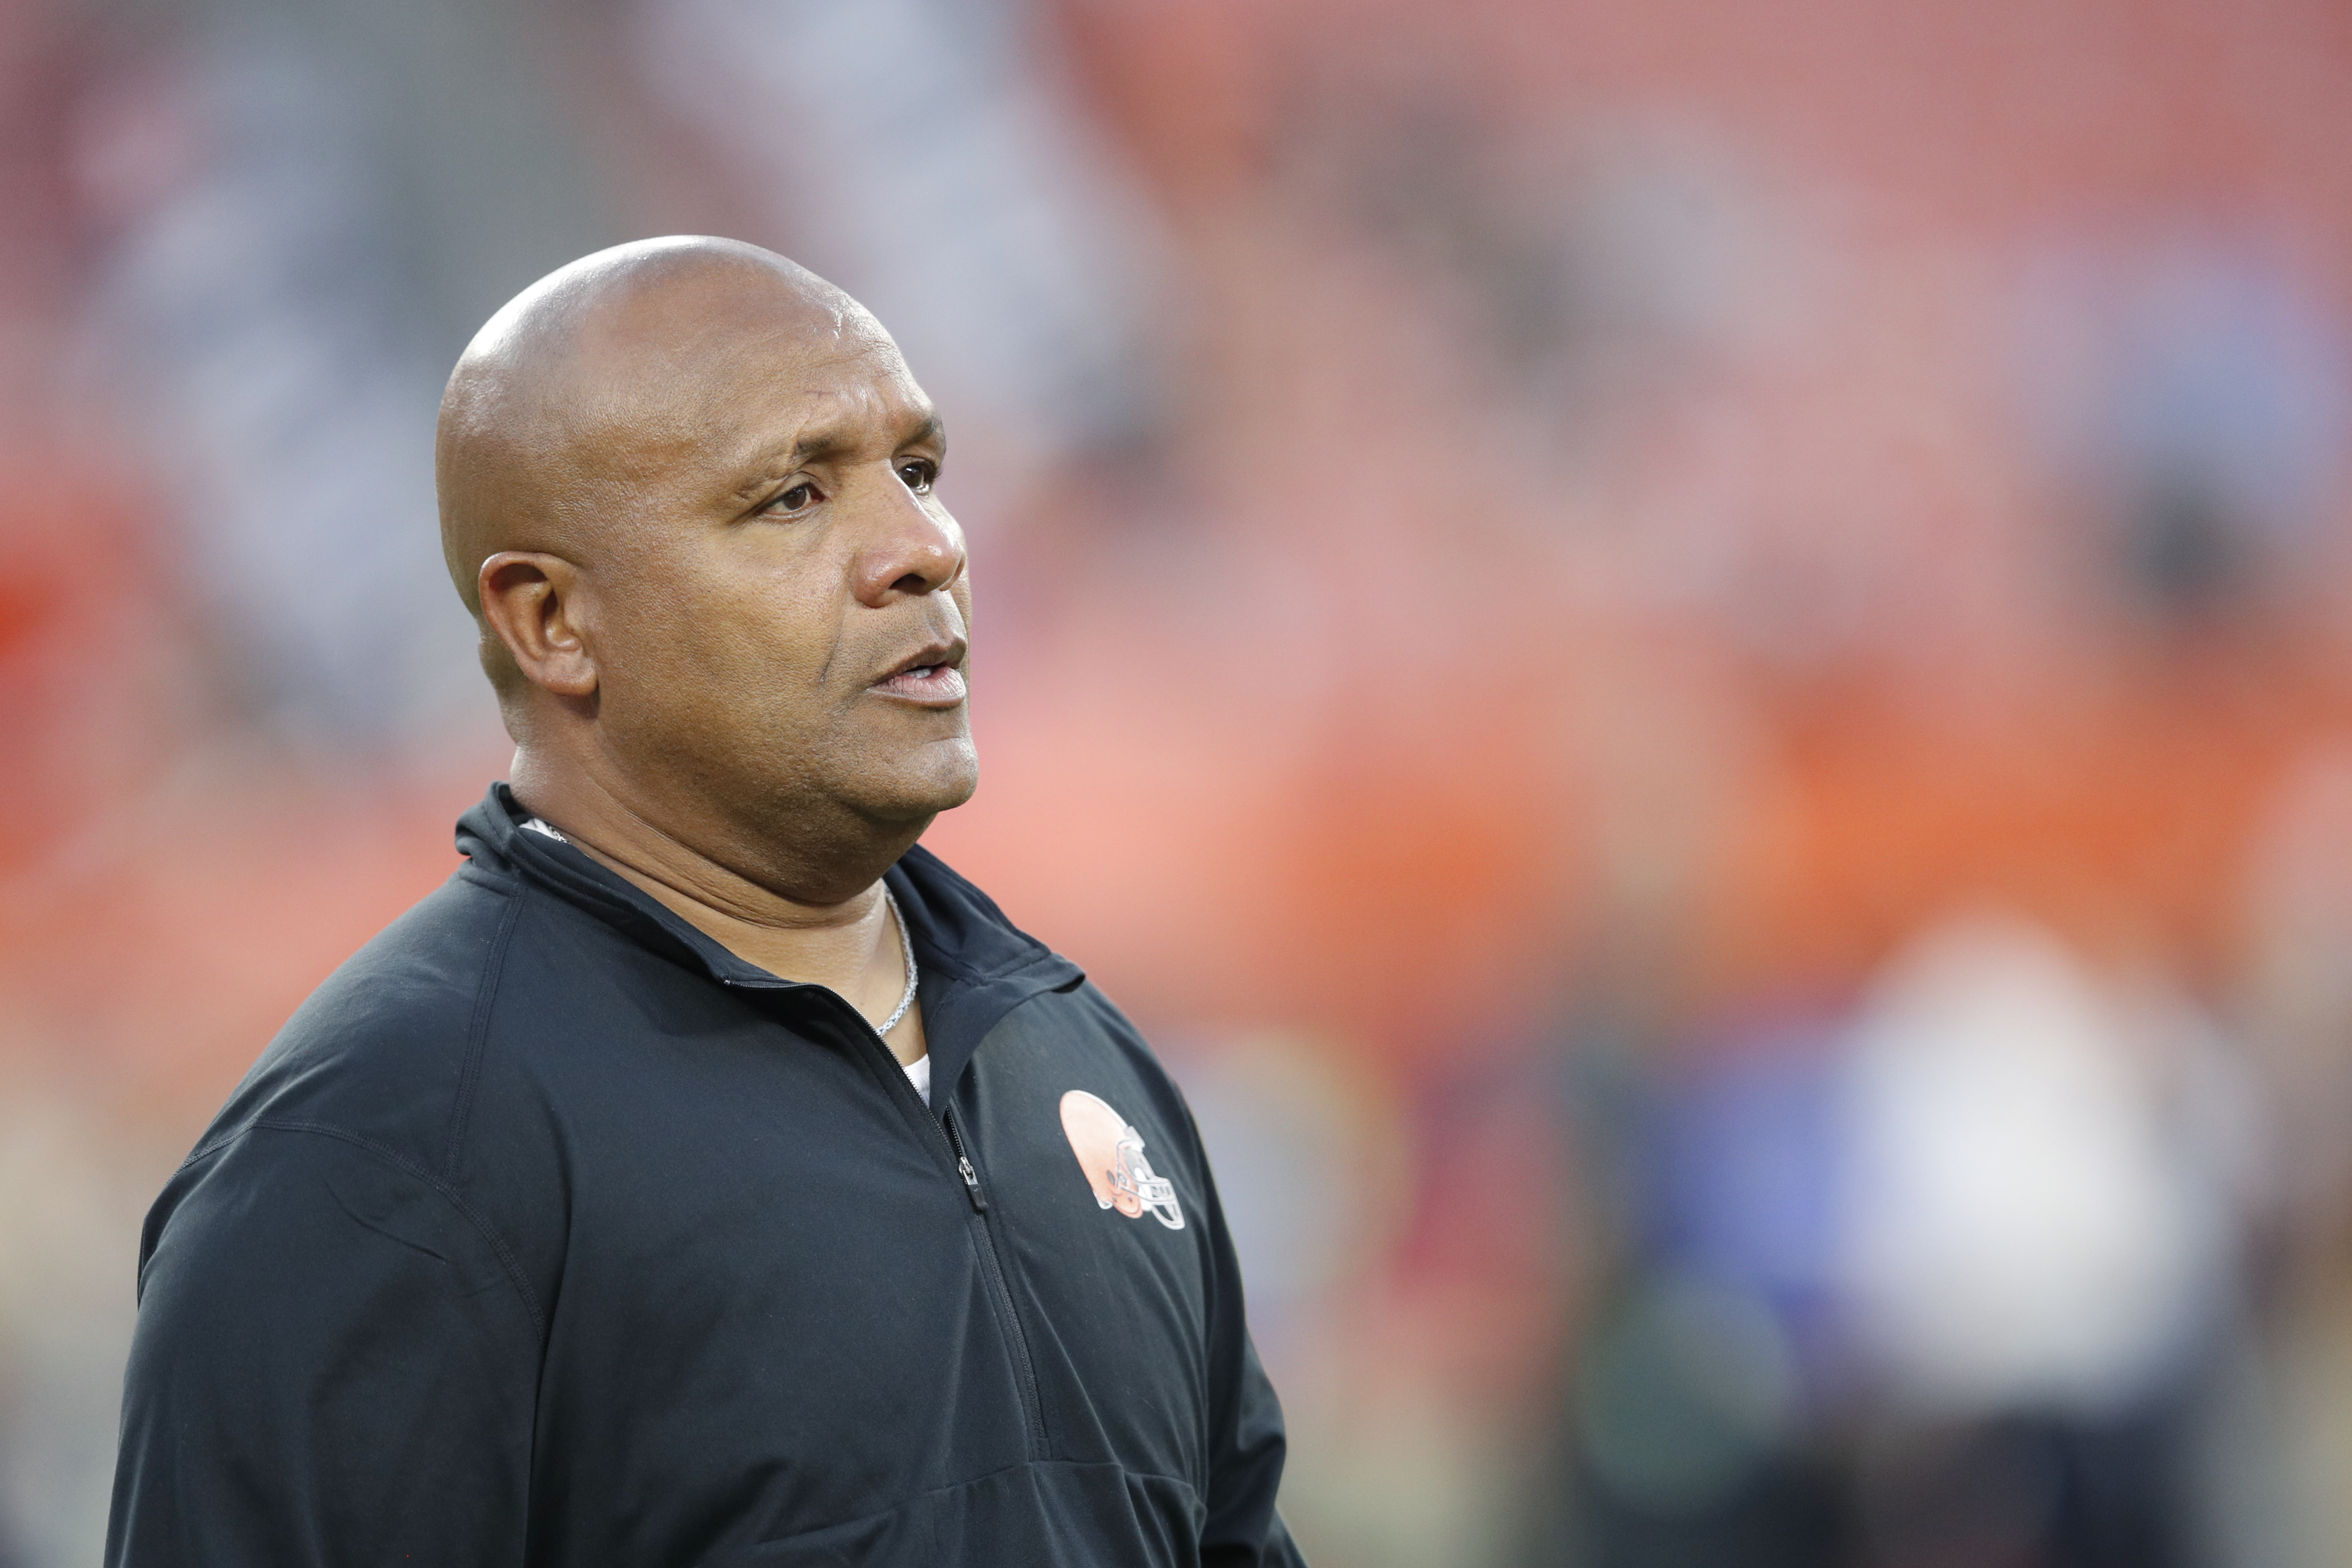 Twitter Torched Hue Jackson For Saying His 3 36 1 Record With Browns Was Some Of The Best Coaching He Did Brobible